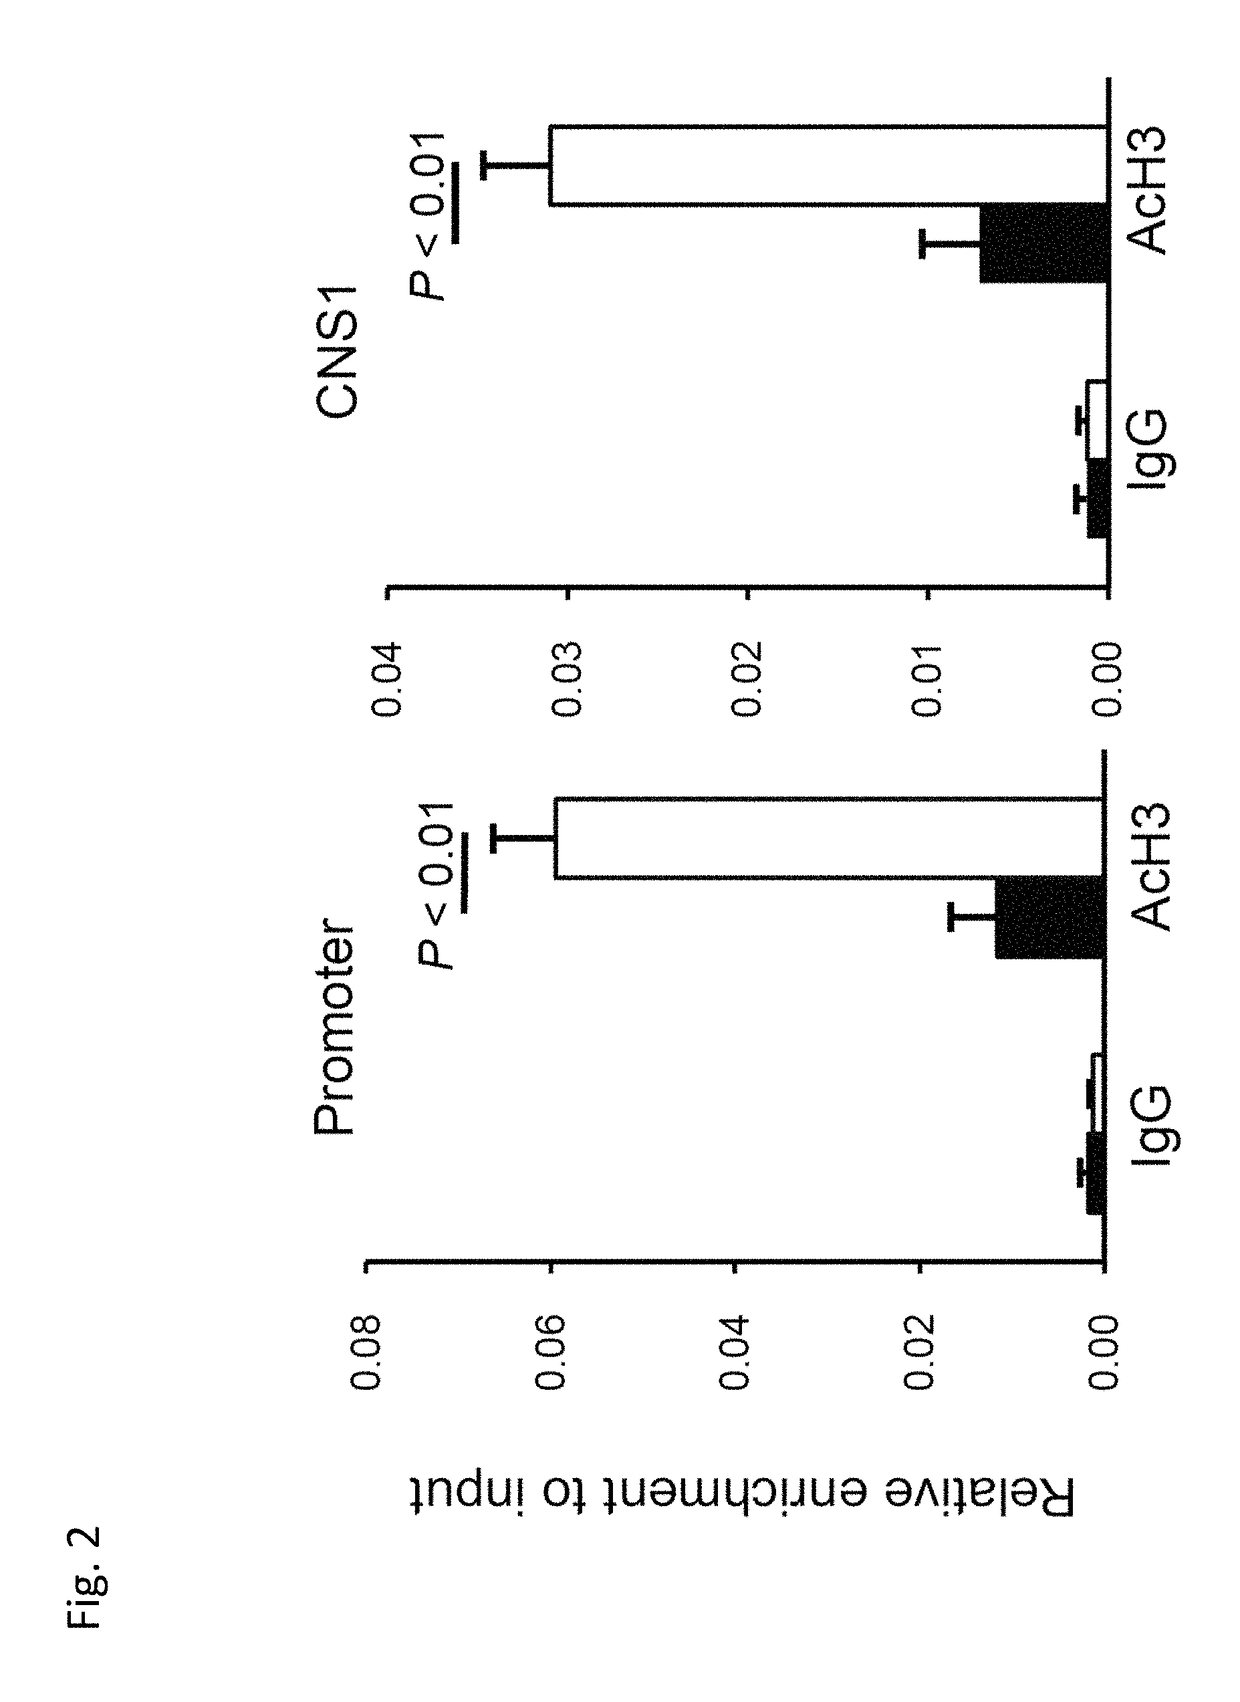 Compositions containing combinations of bioactive molecules derived from microbiota for treatment of disease